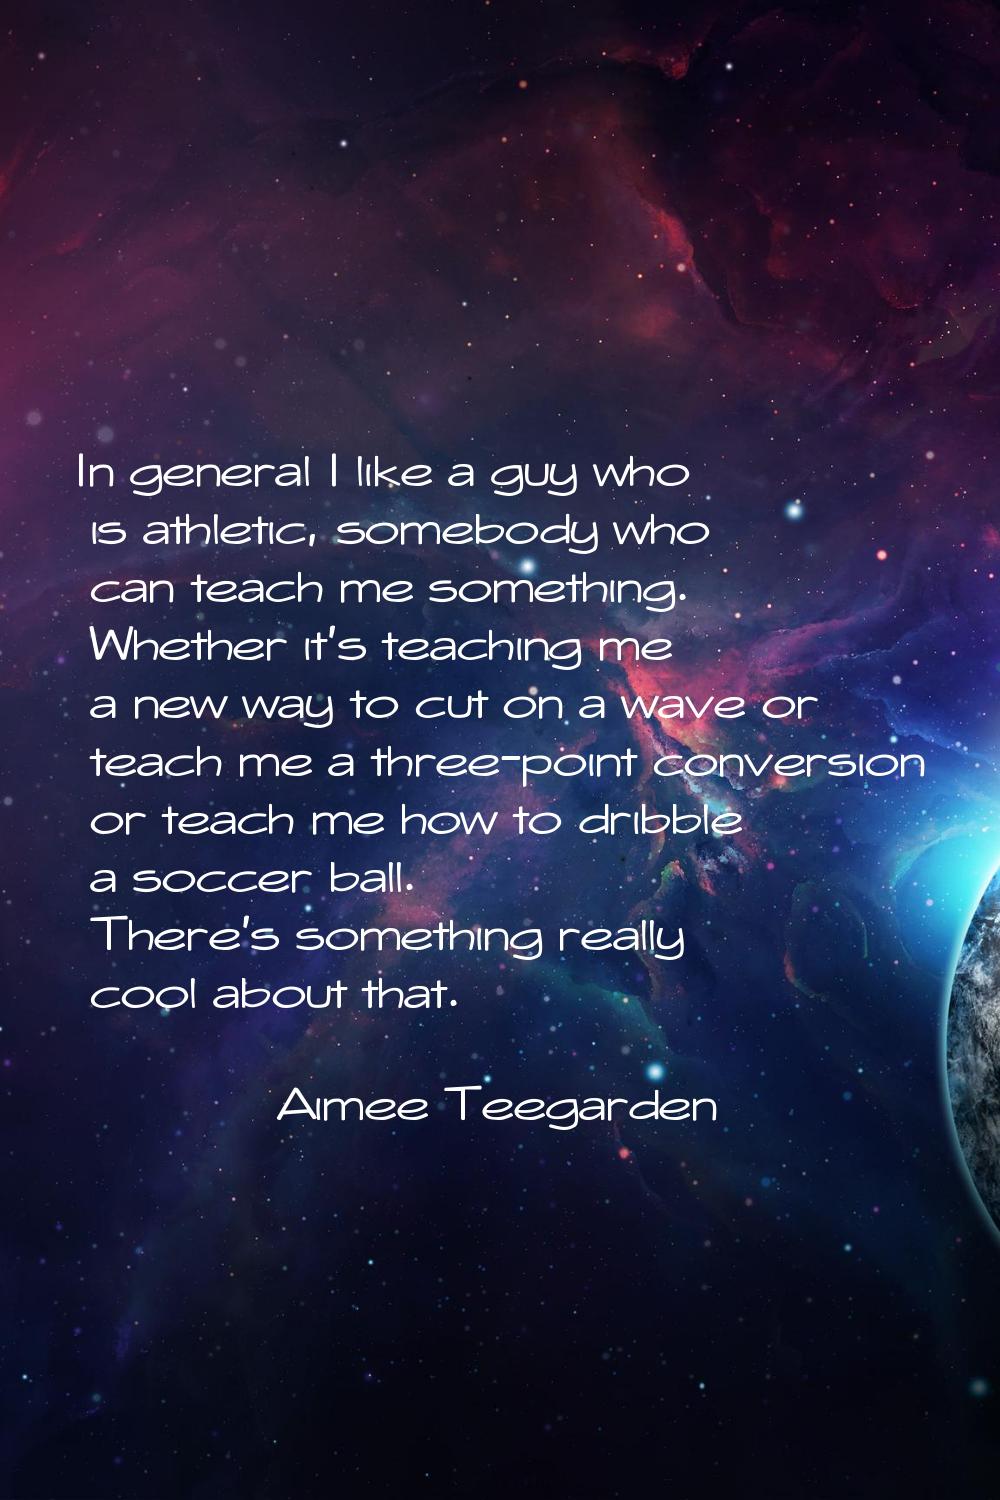 In general I like a guy who is athletic, somebody who can teach me something. Whether it's teaching